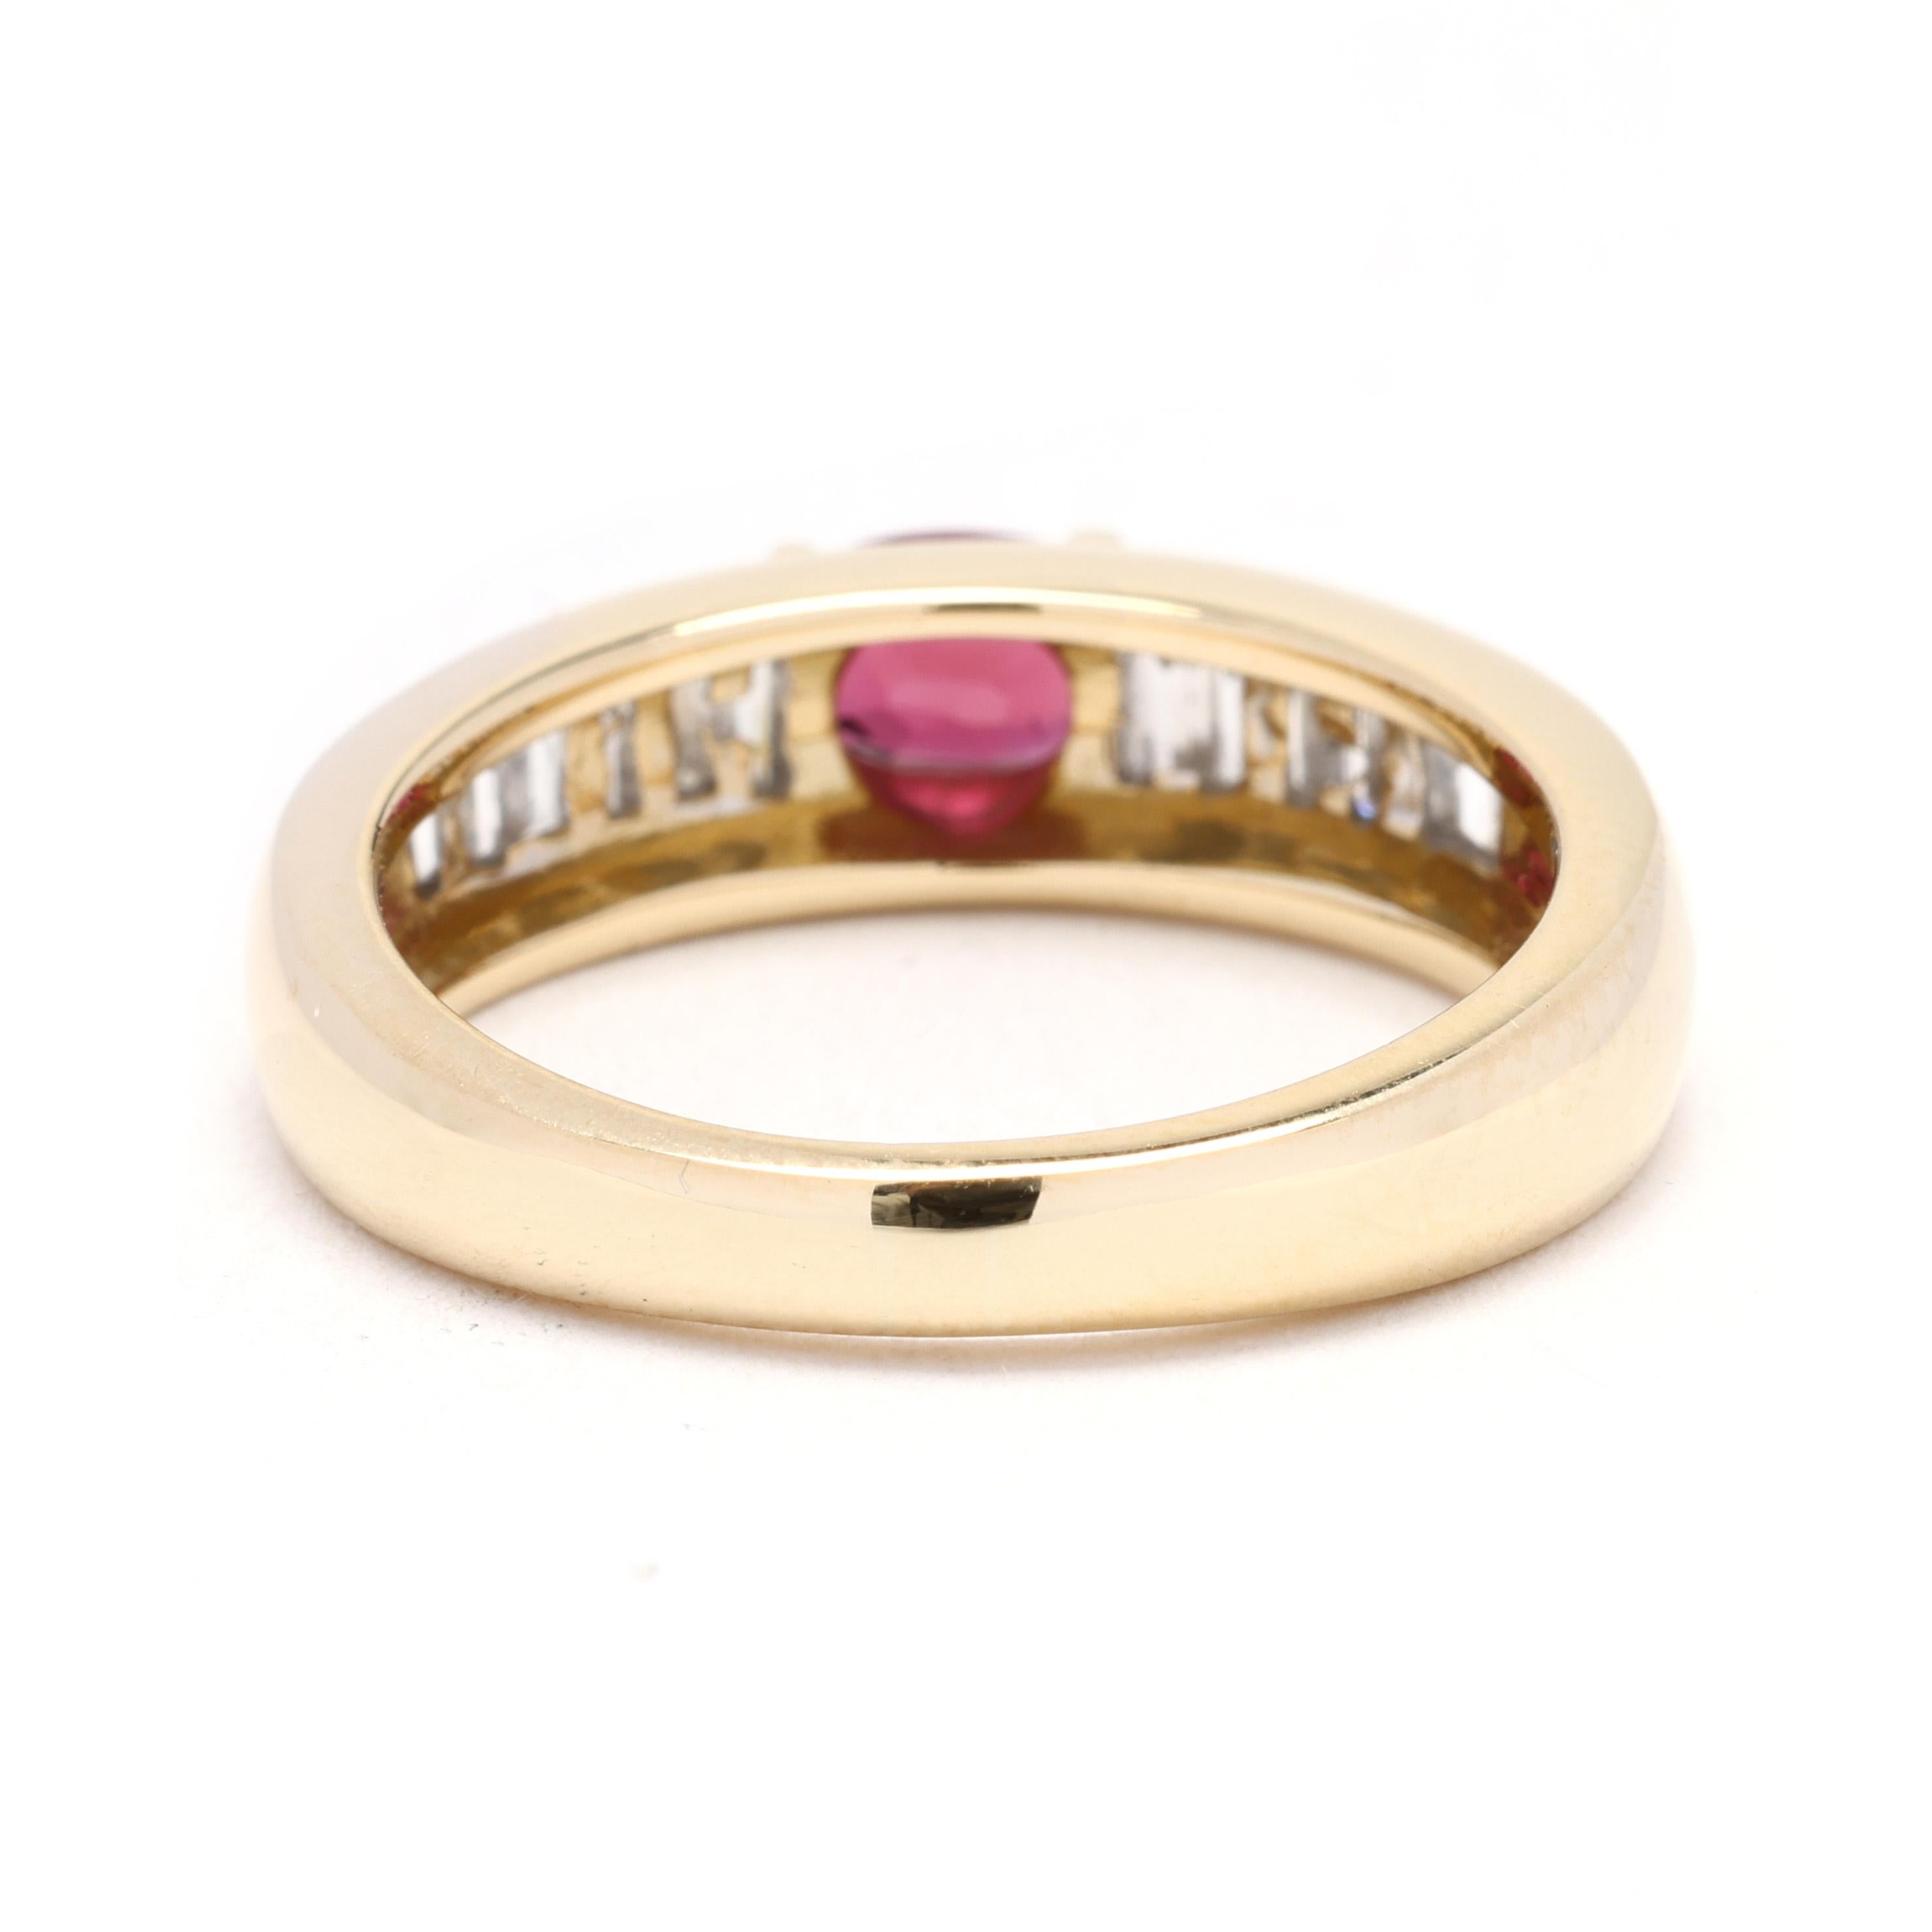 Baguette Cut 1.2ctw Diamond and Ruby Engagement Ring, 18k Yellow Gold, Ring Size 6.75 For Sale